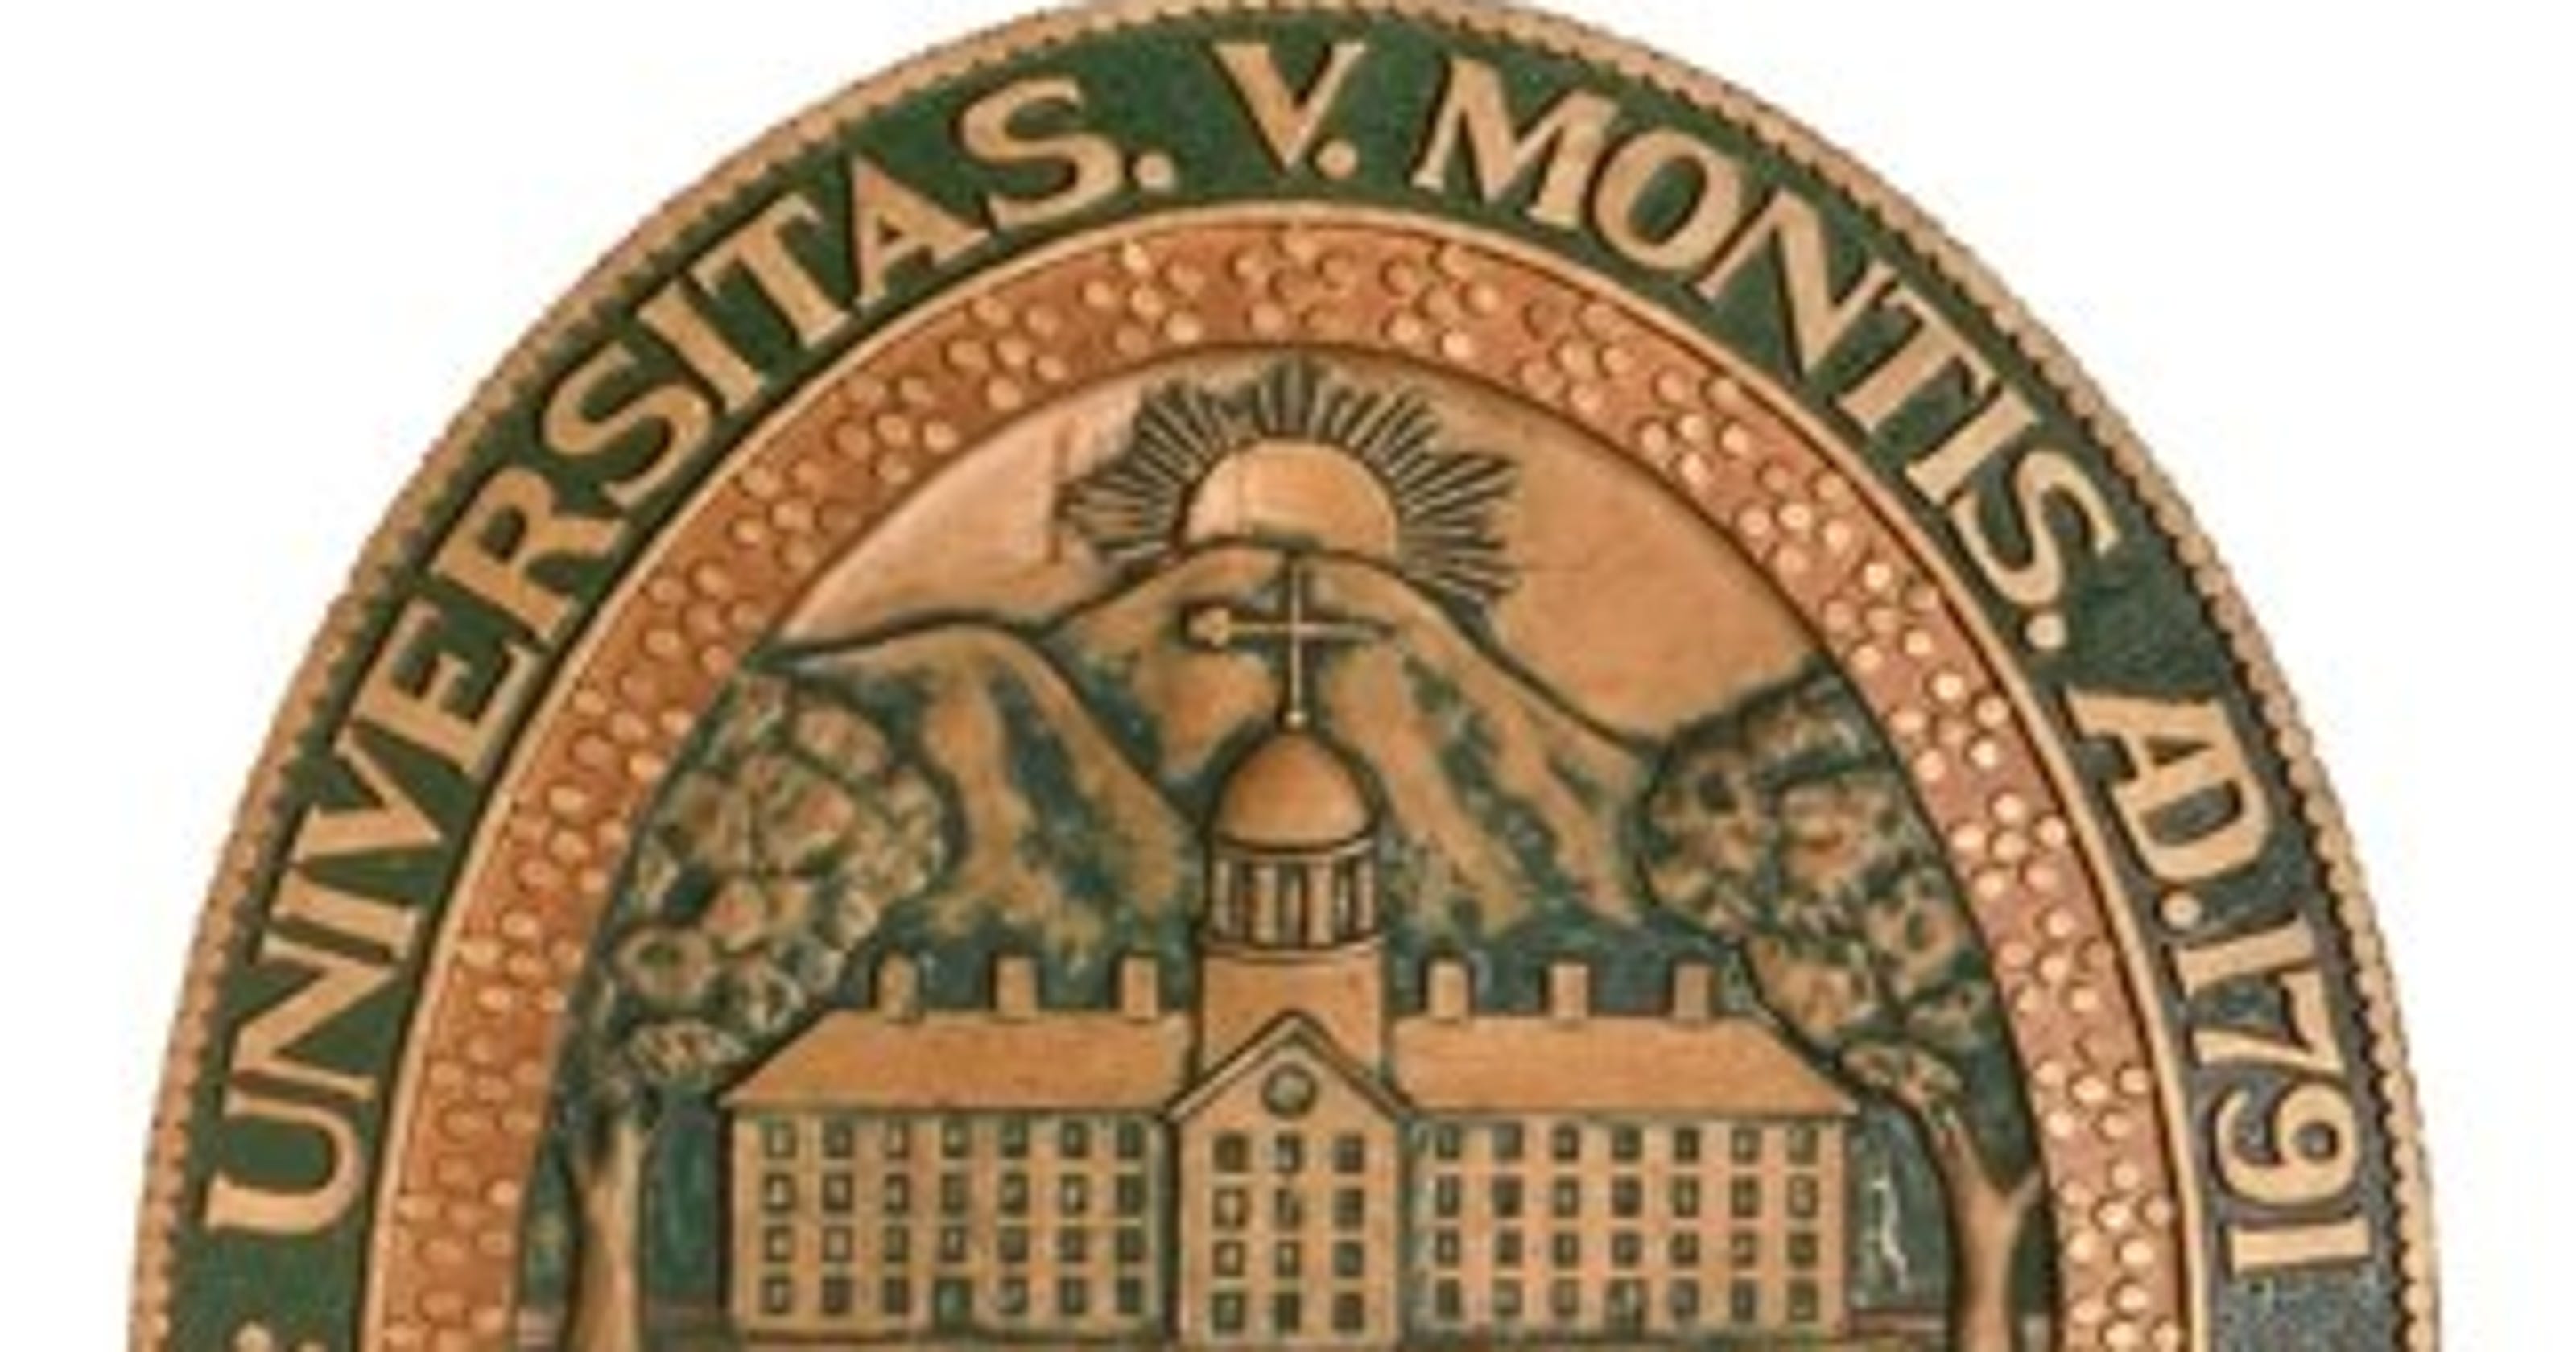 Why is the University of Vermont abbreviation UVM, not UVT?